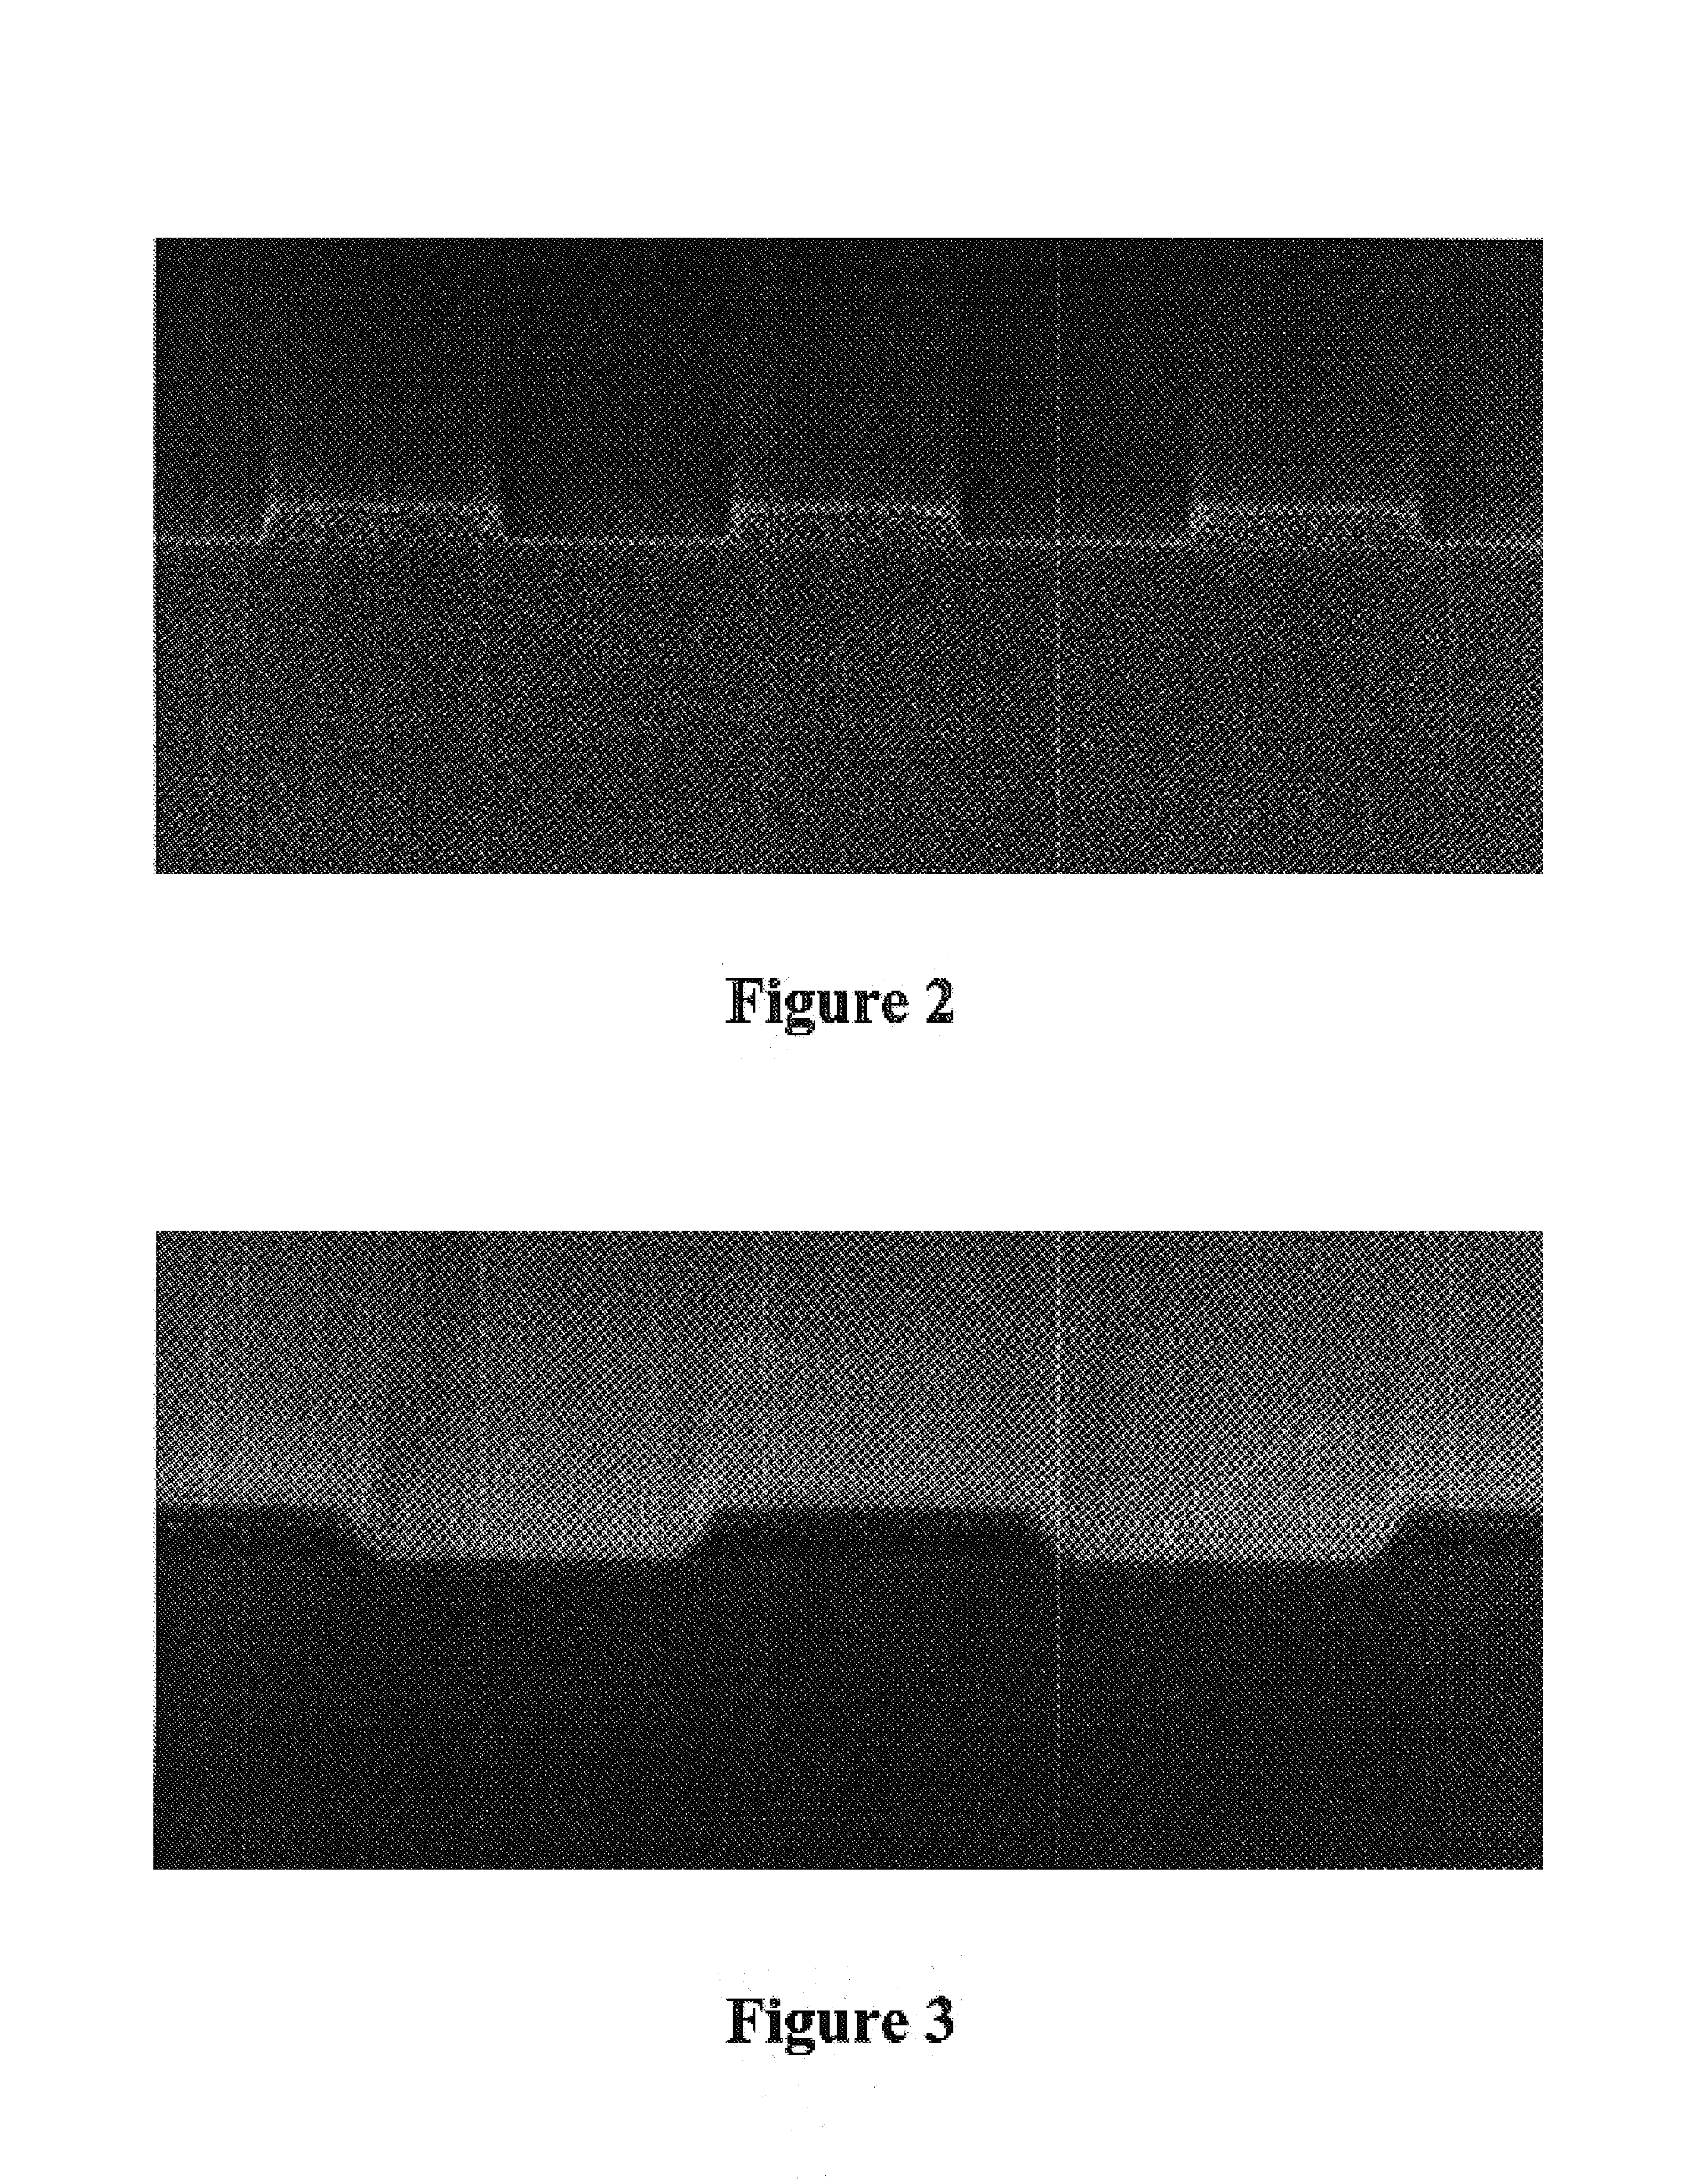 Wet developable hard mask in conjunction with thin photoresist for micro photolithography